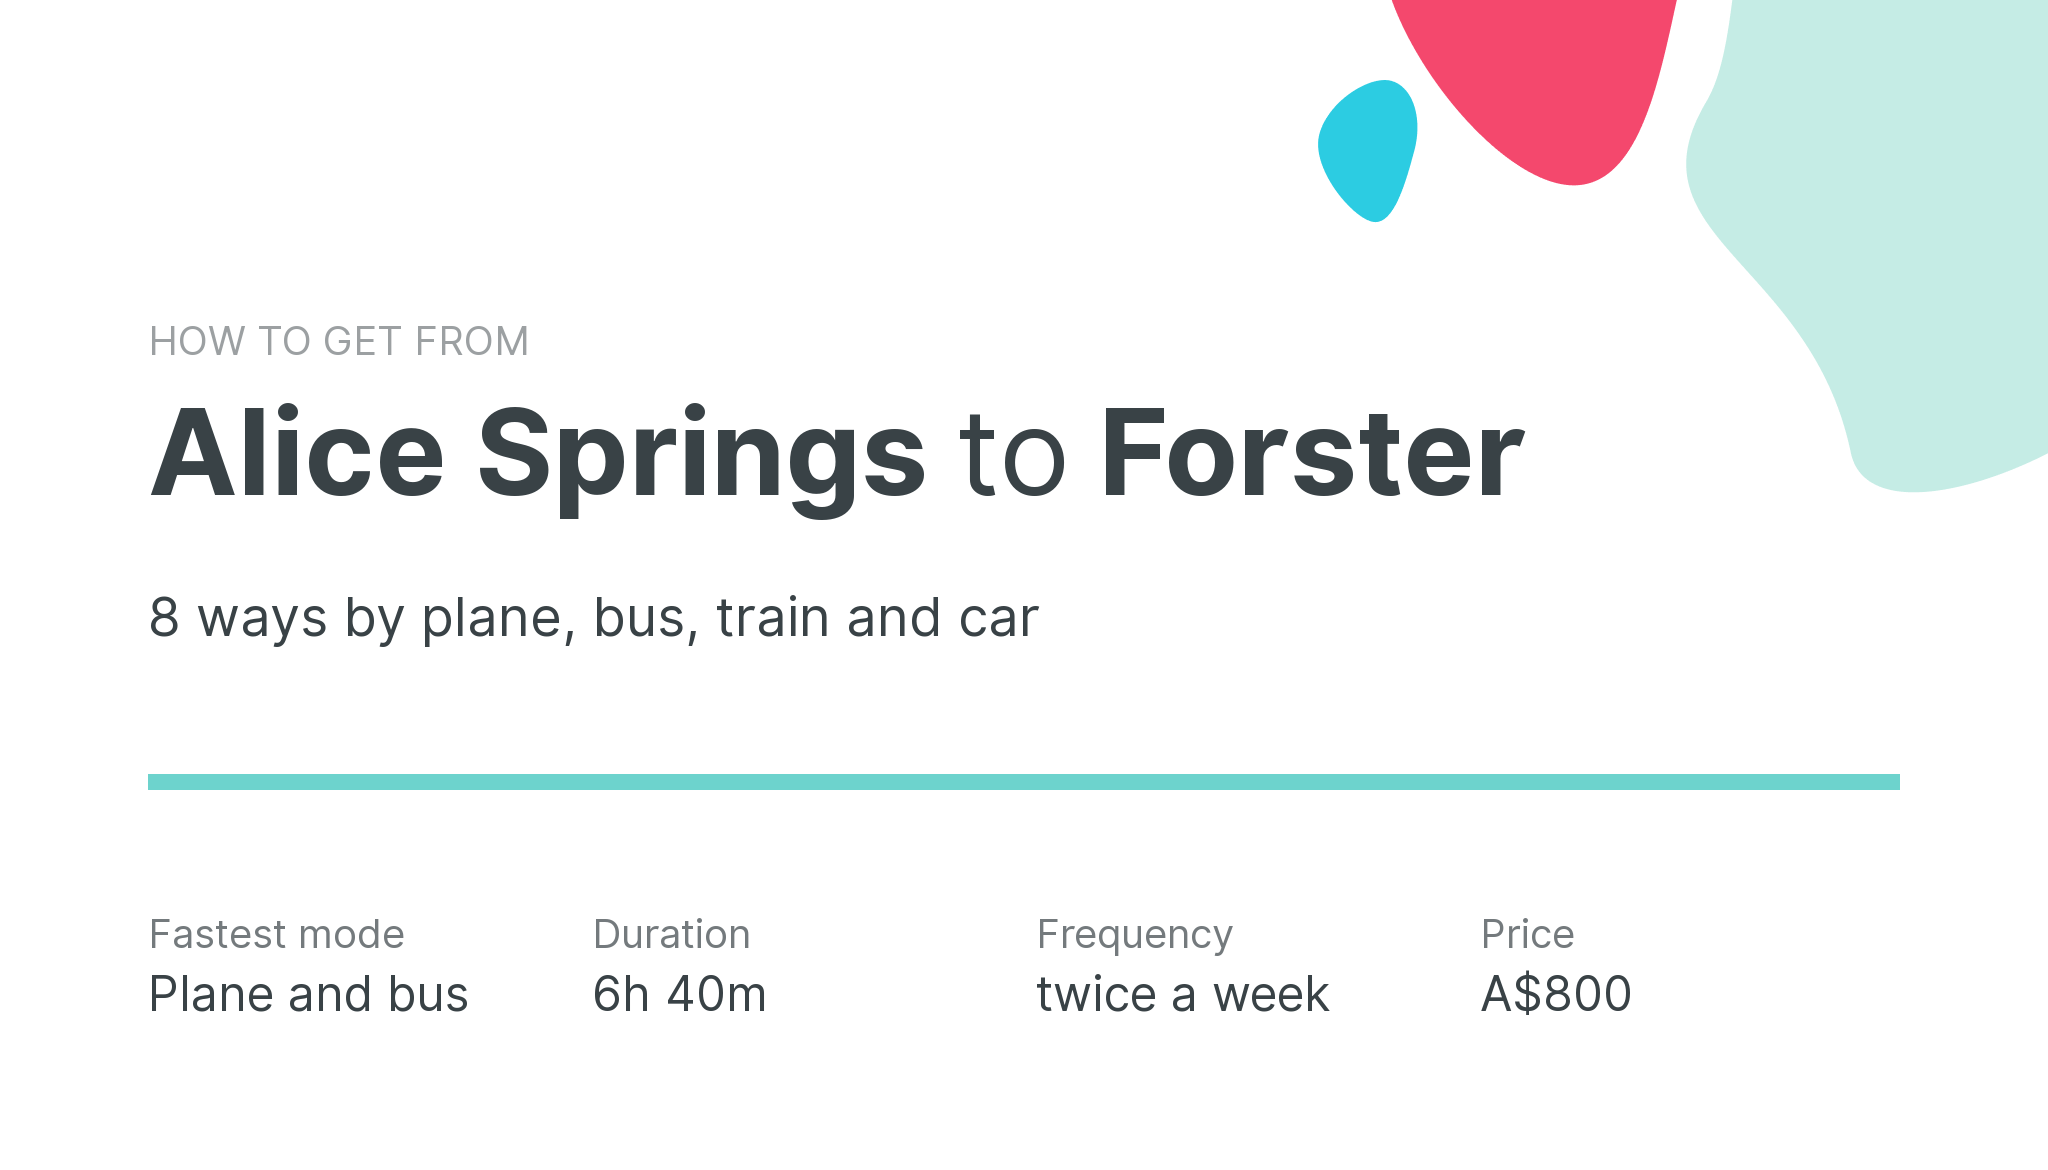 How do I get from Alice Springs to Forster